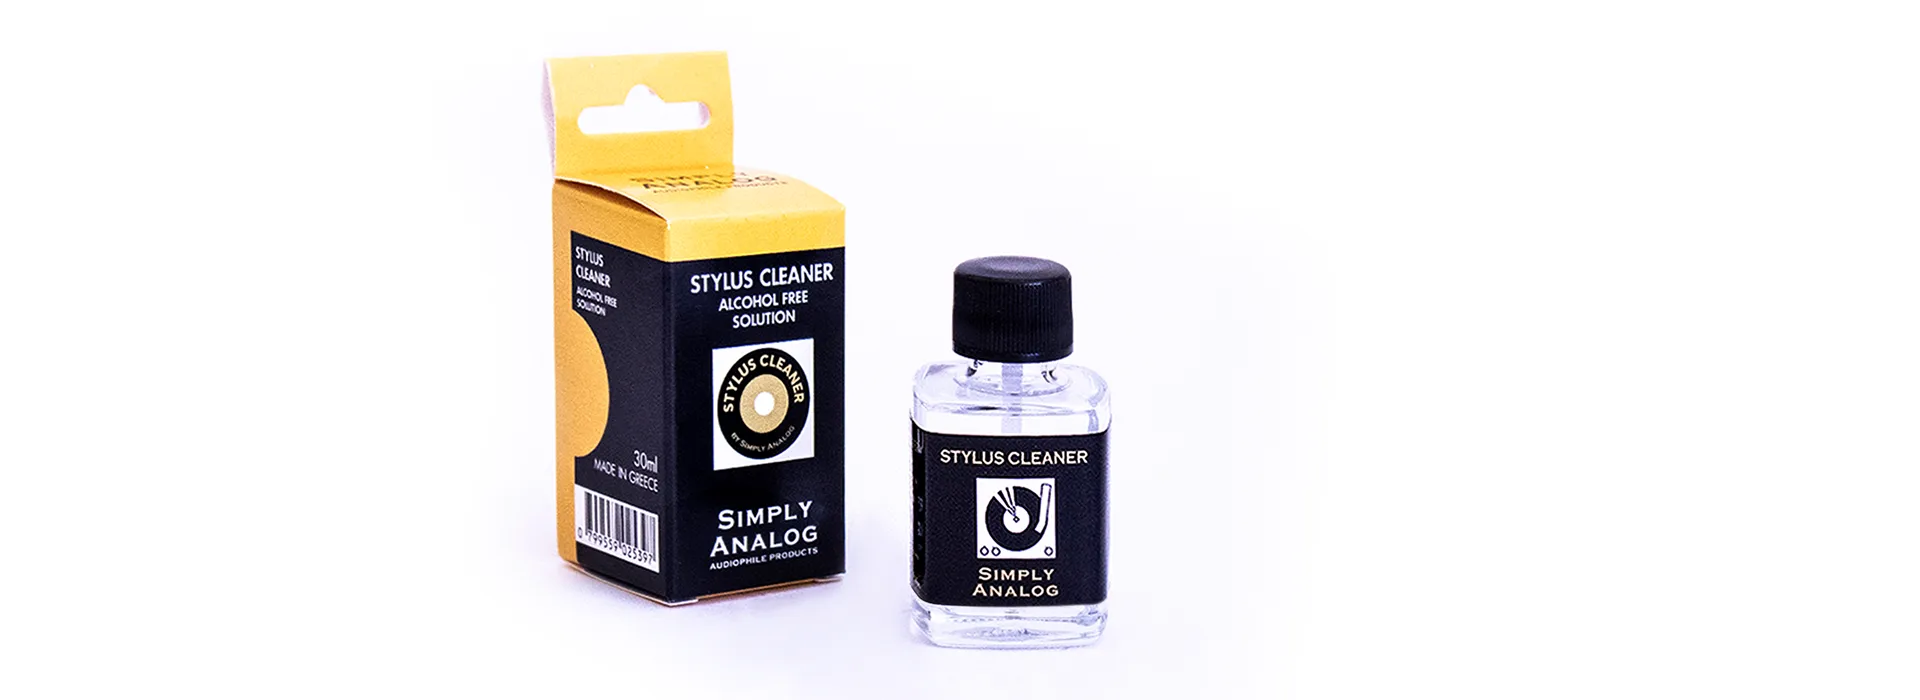 Simply Analog Stylus Cleaner